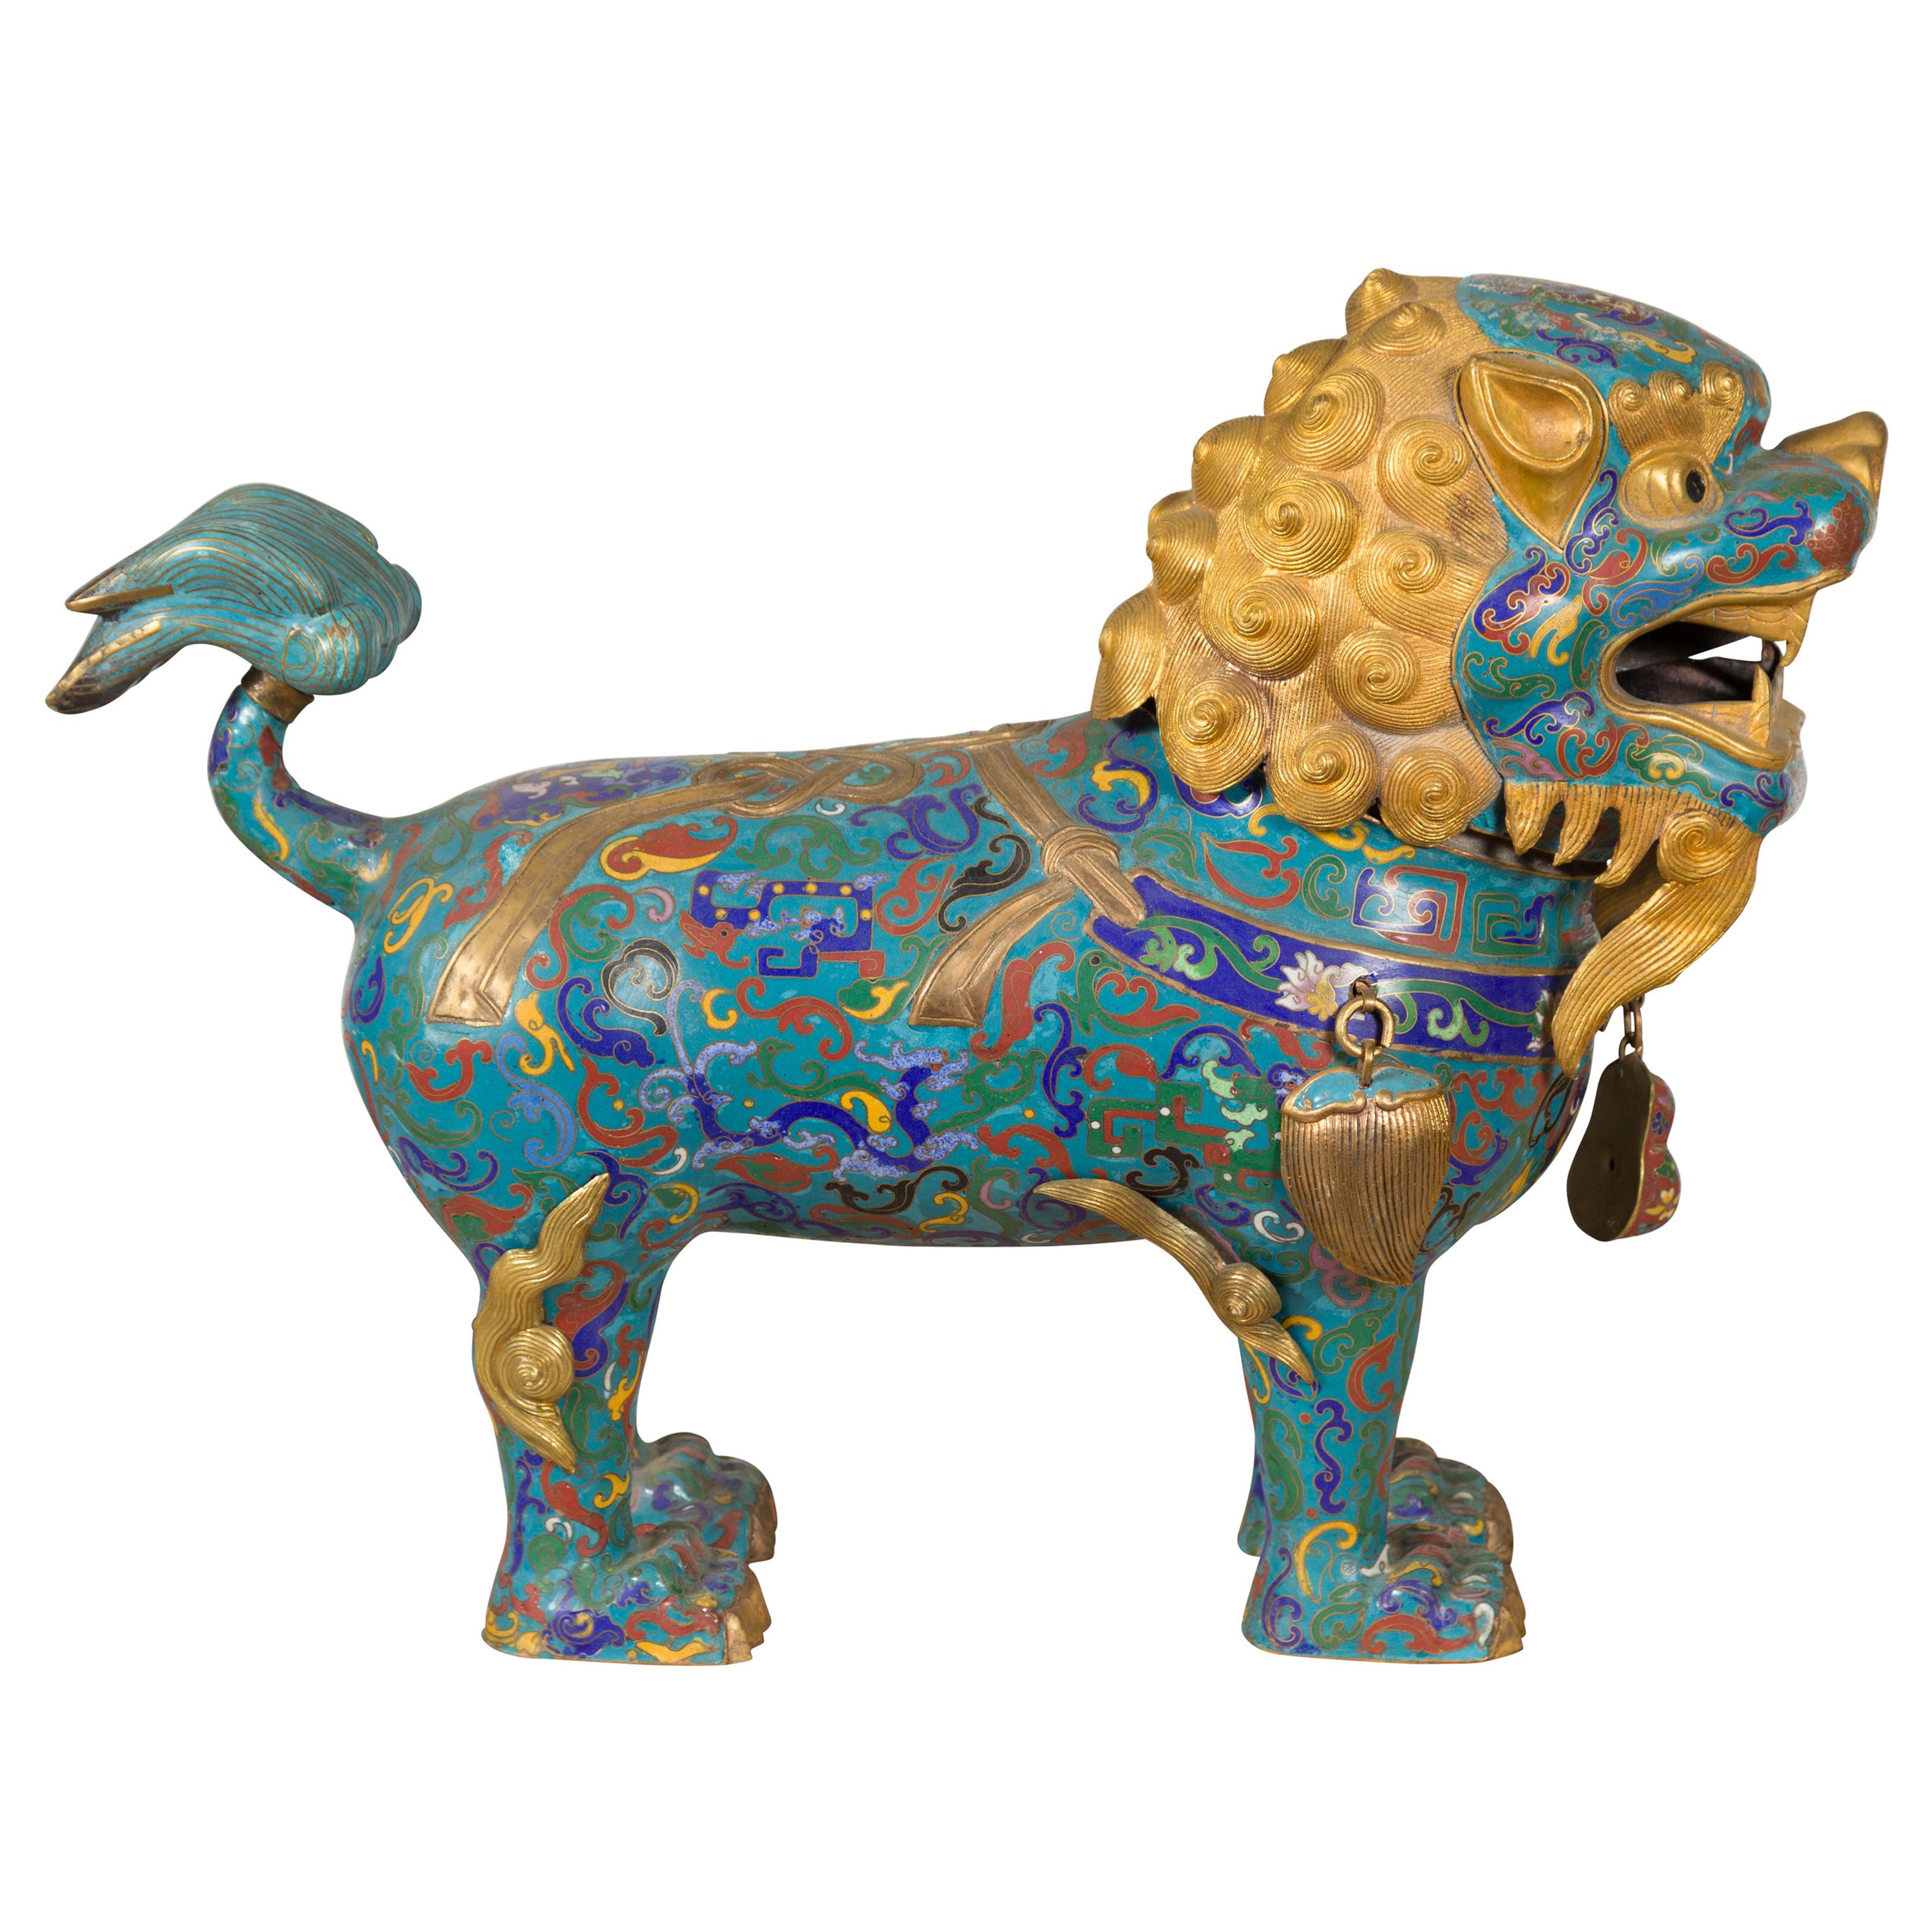 Chinese Vintage Metal Cloisonné Foo Dog Guardian Lion with Teal and Golden Tones